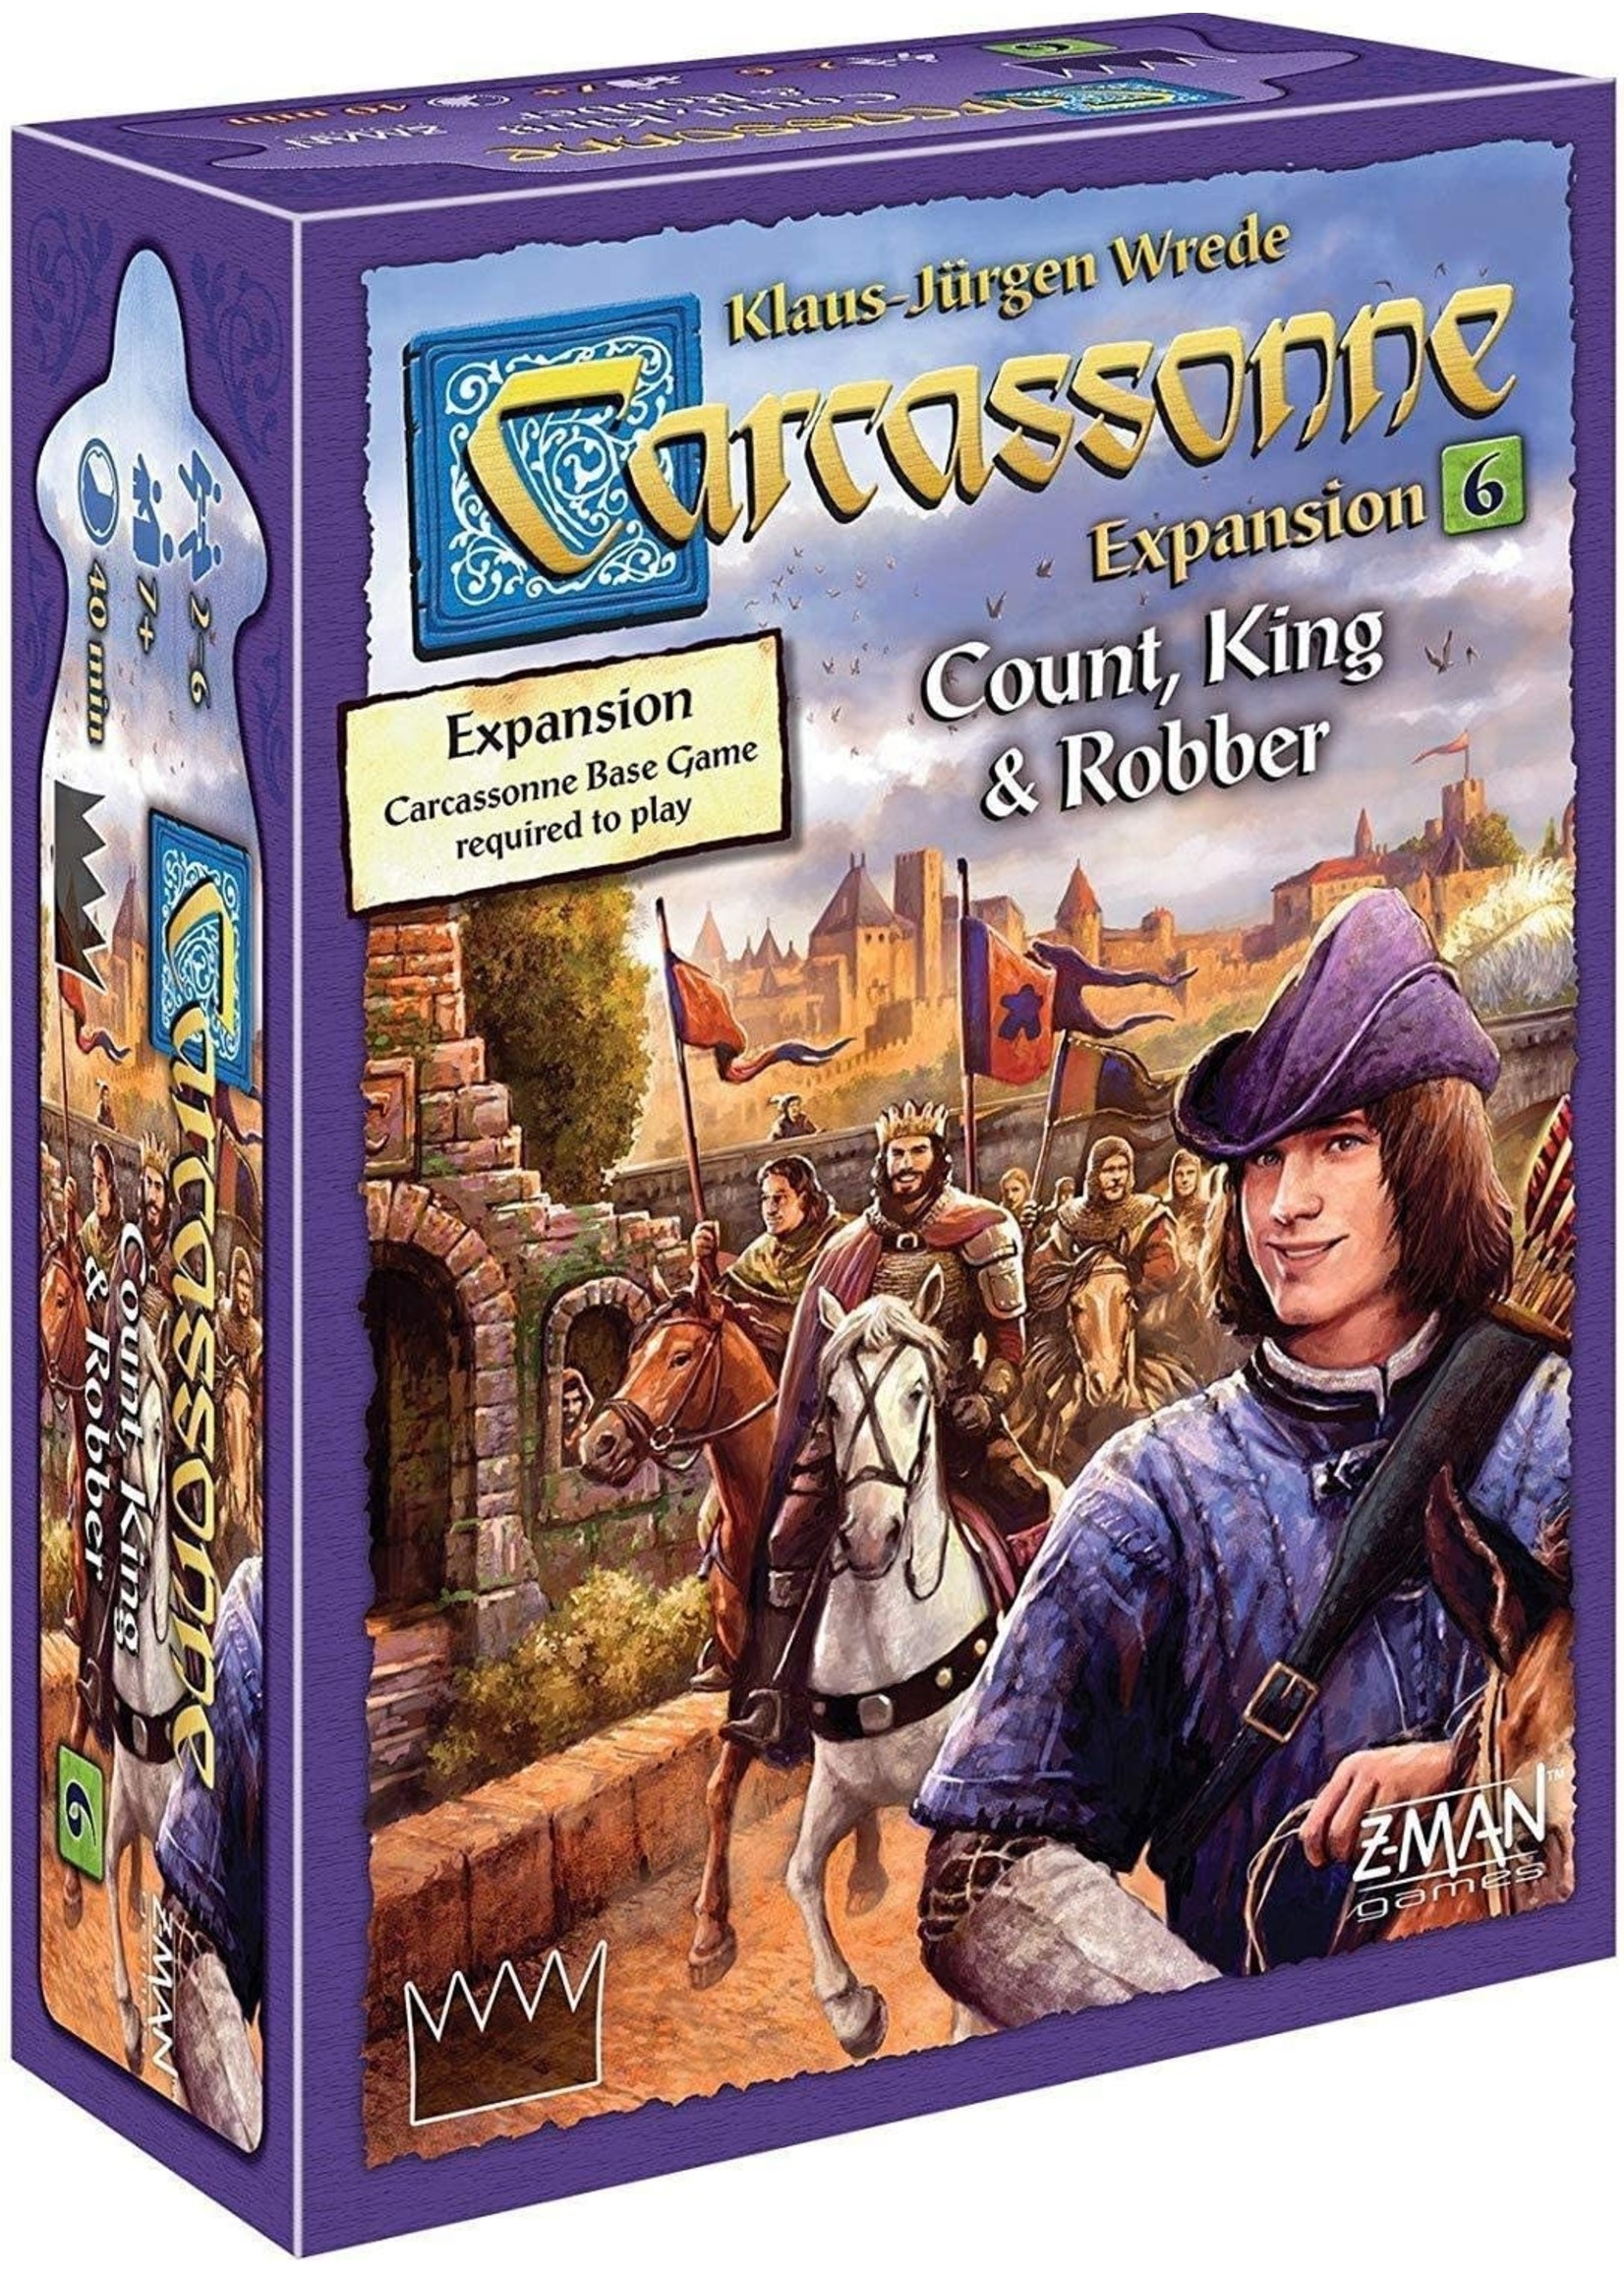 Z-Man Games Carcassonne Exp 6: Count, King & Robber